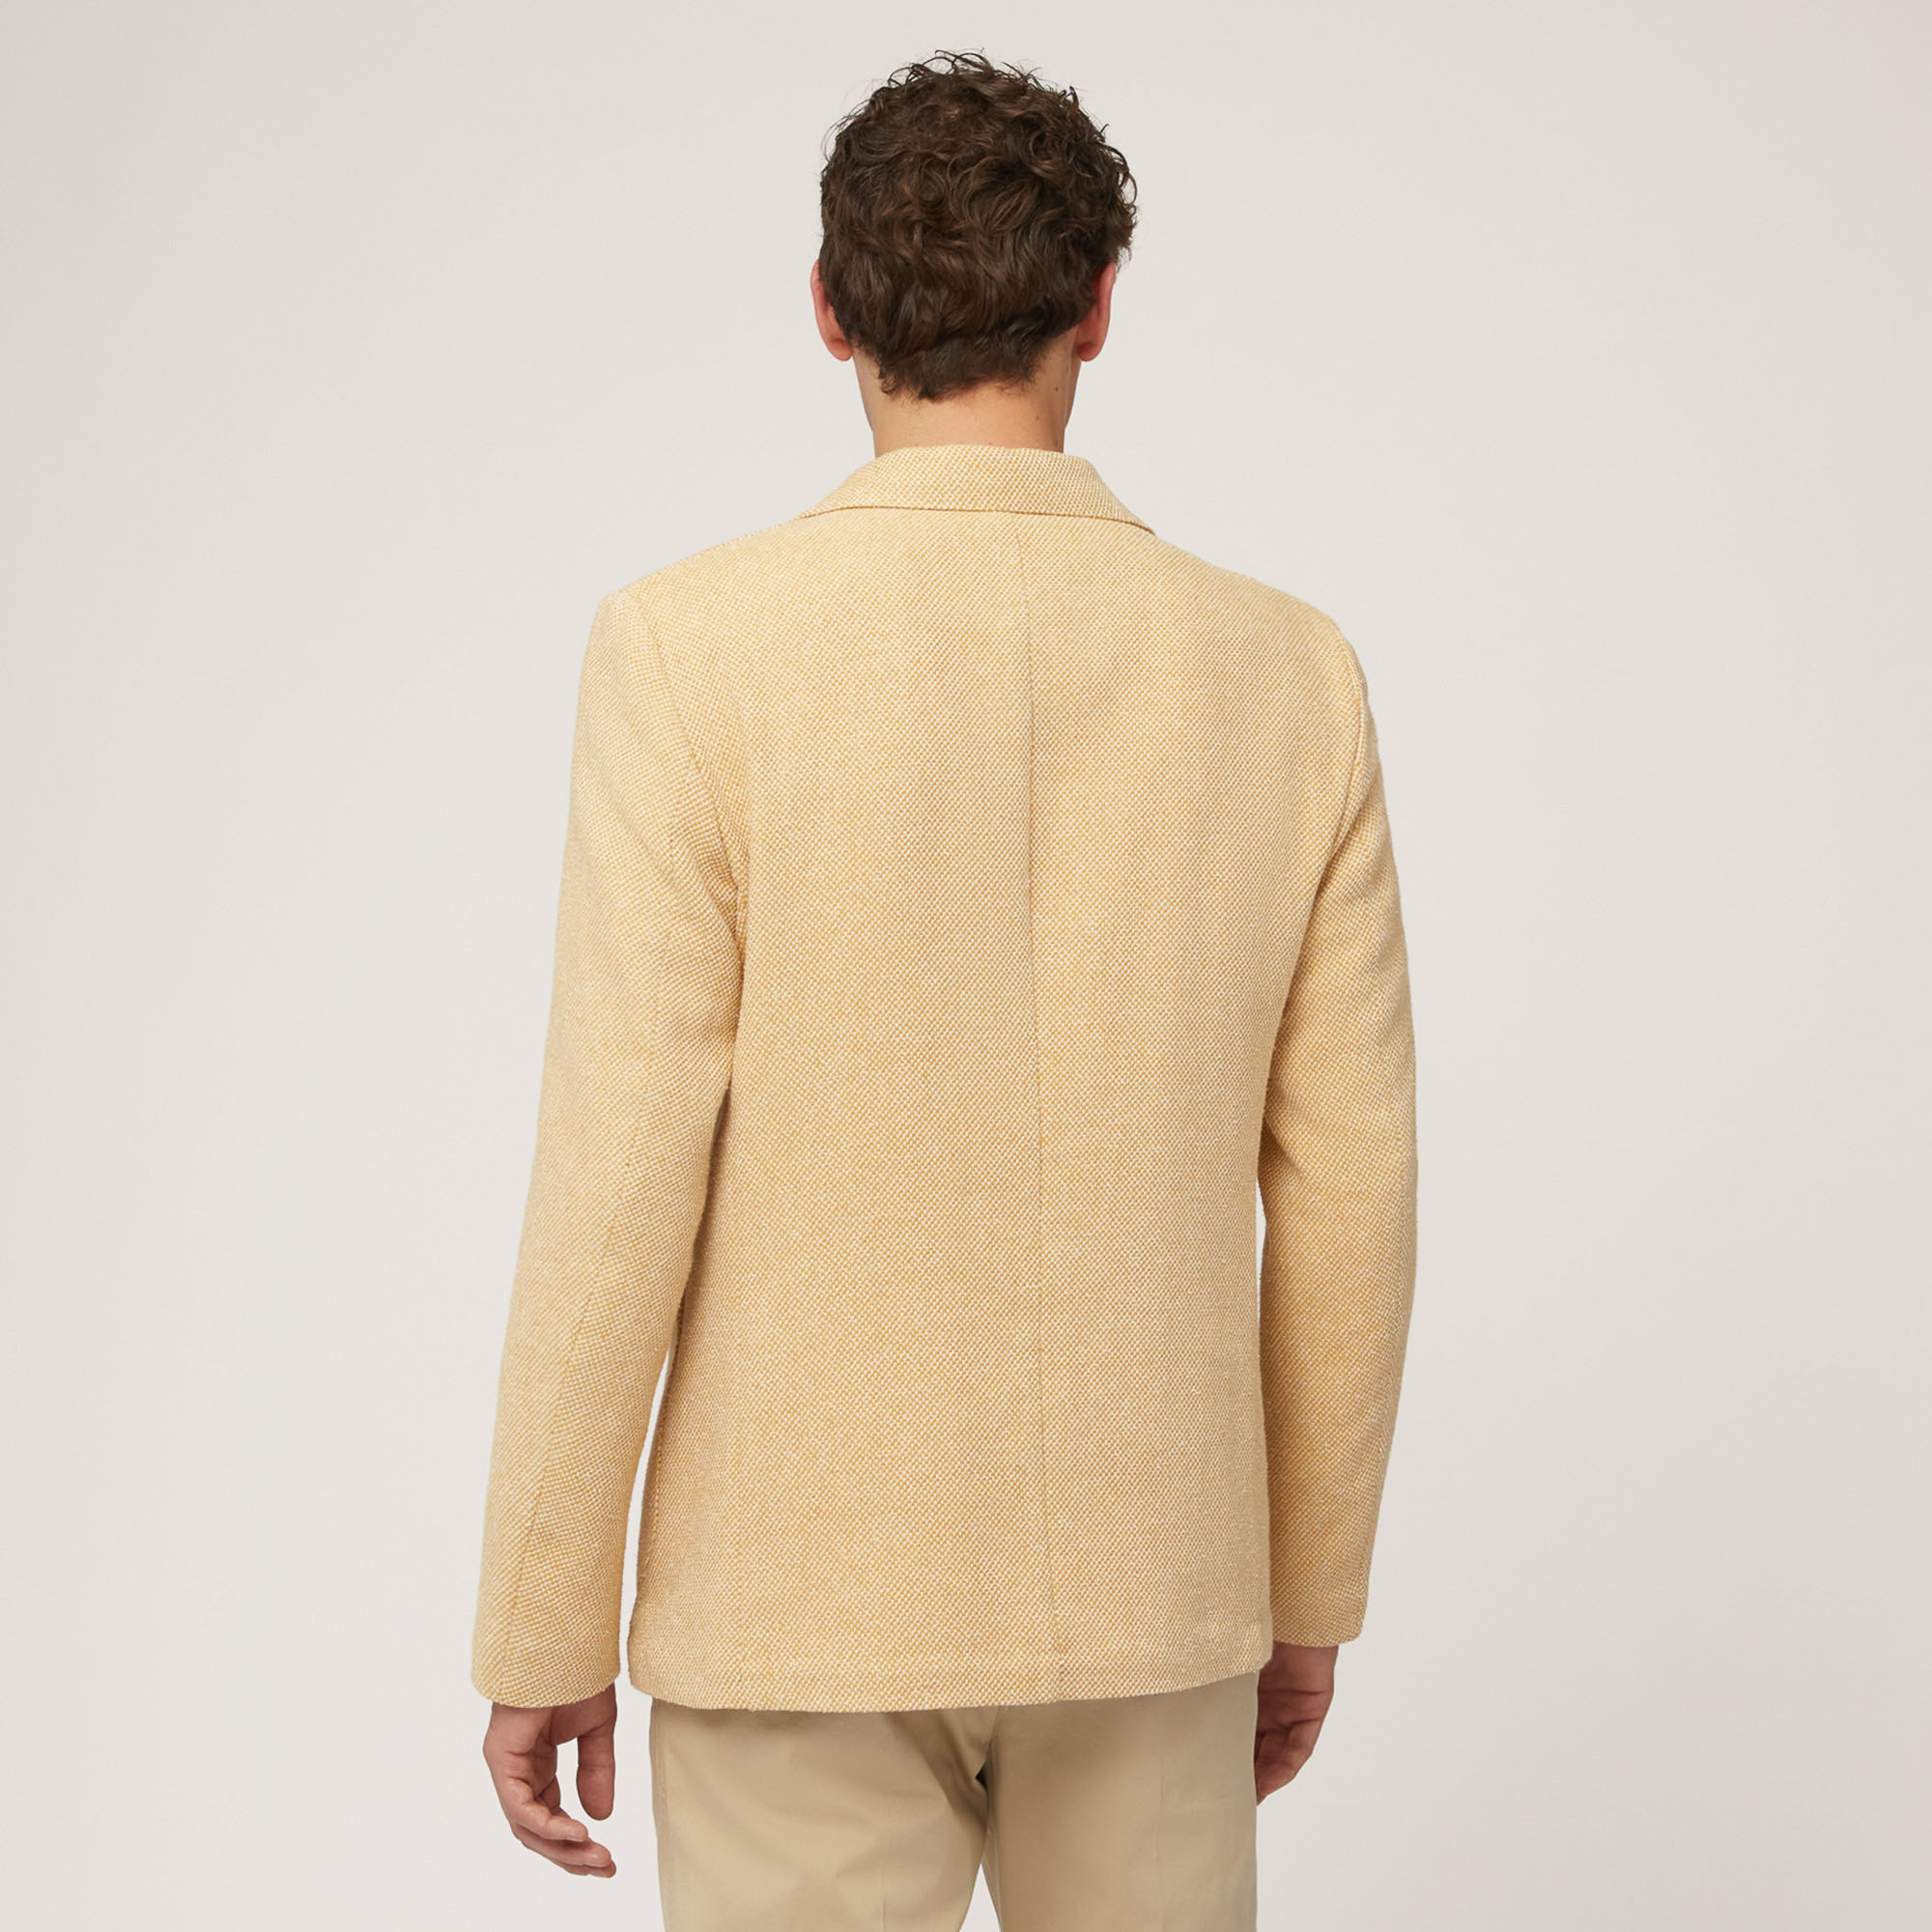 Cotton and Linen Jacket with Pockets and Breast Pocket, Gold, large image number 1